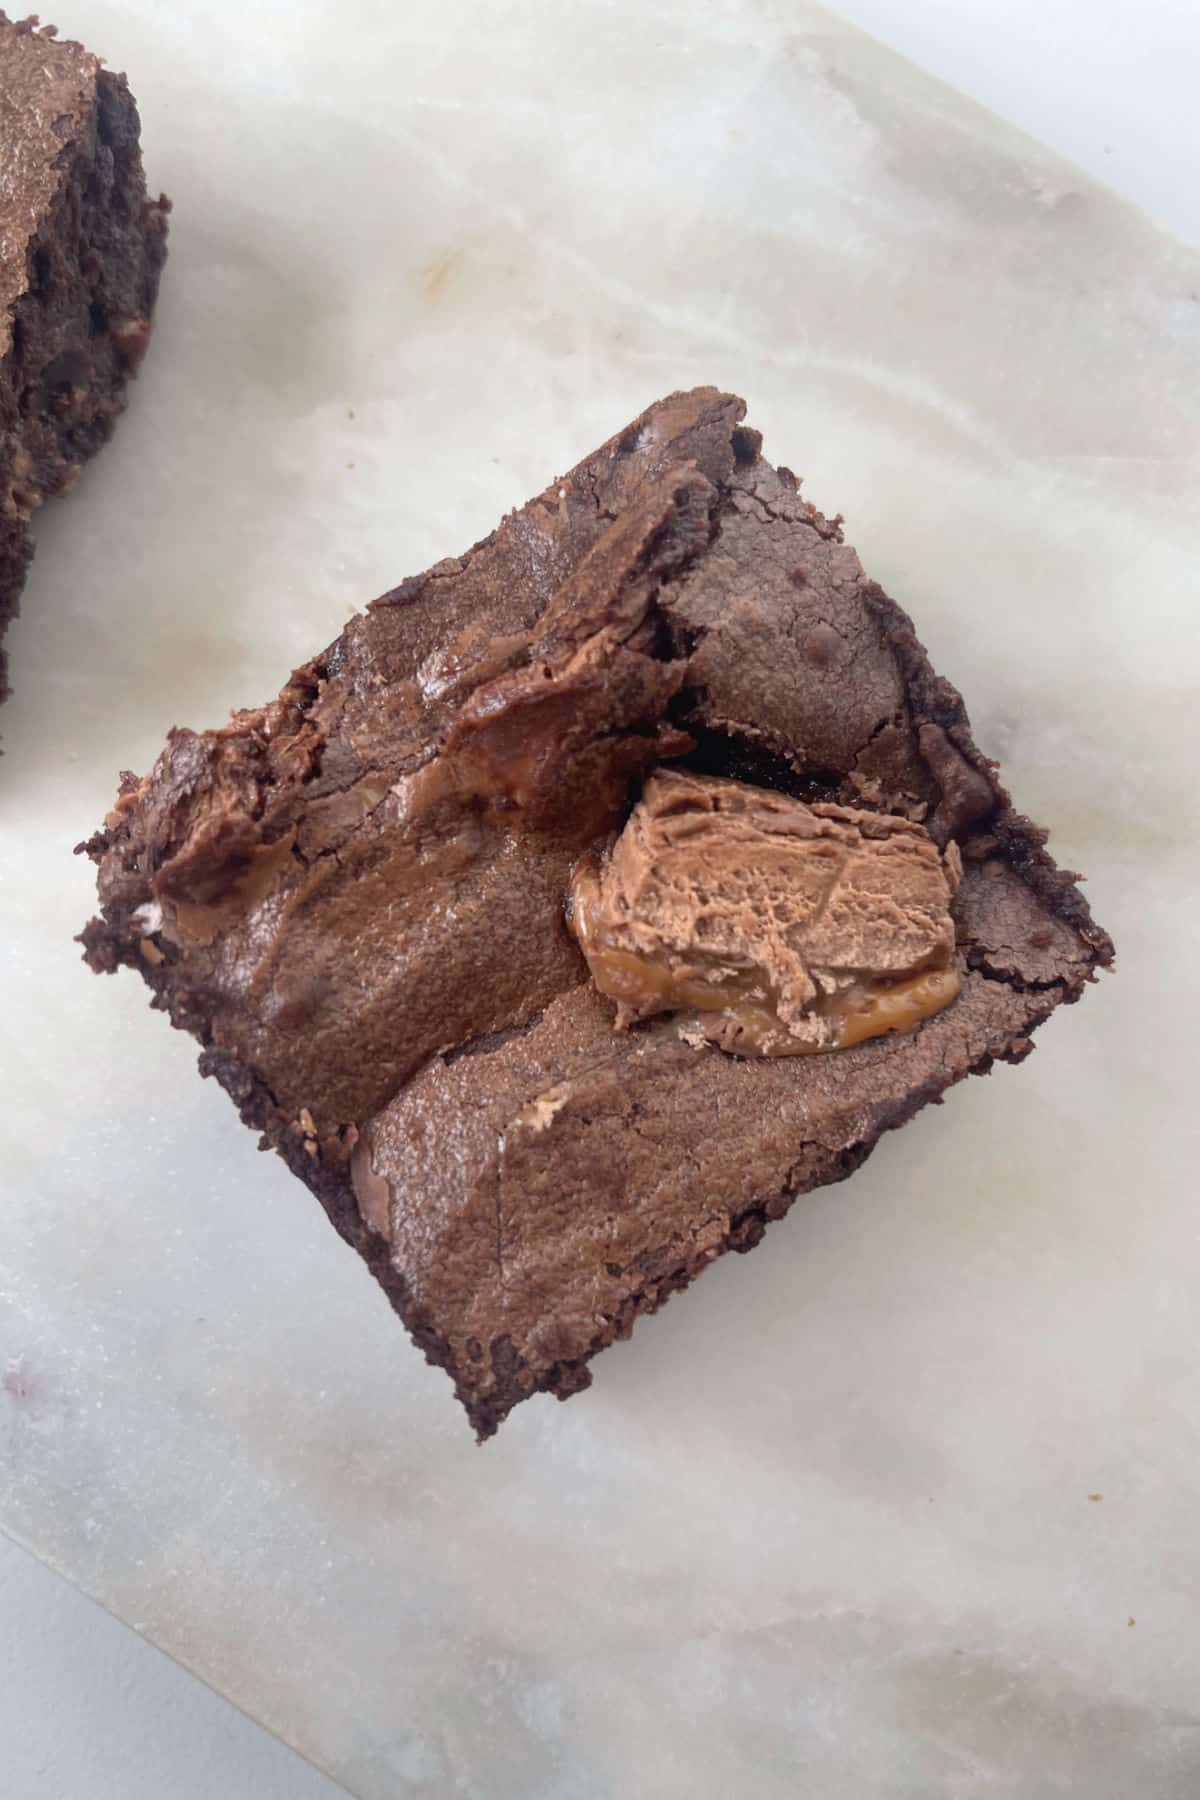 Overhead view of a piece of Mars Bar Brownie sitting on a stone serving tray.